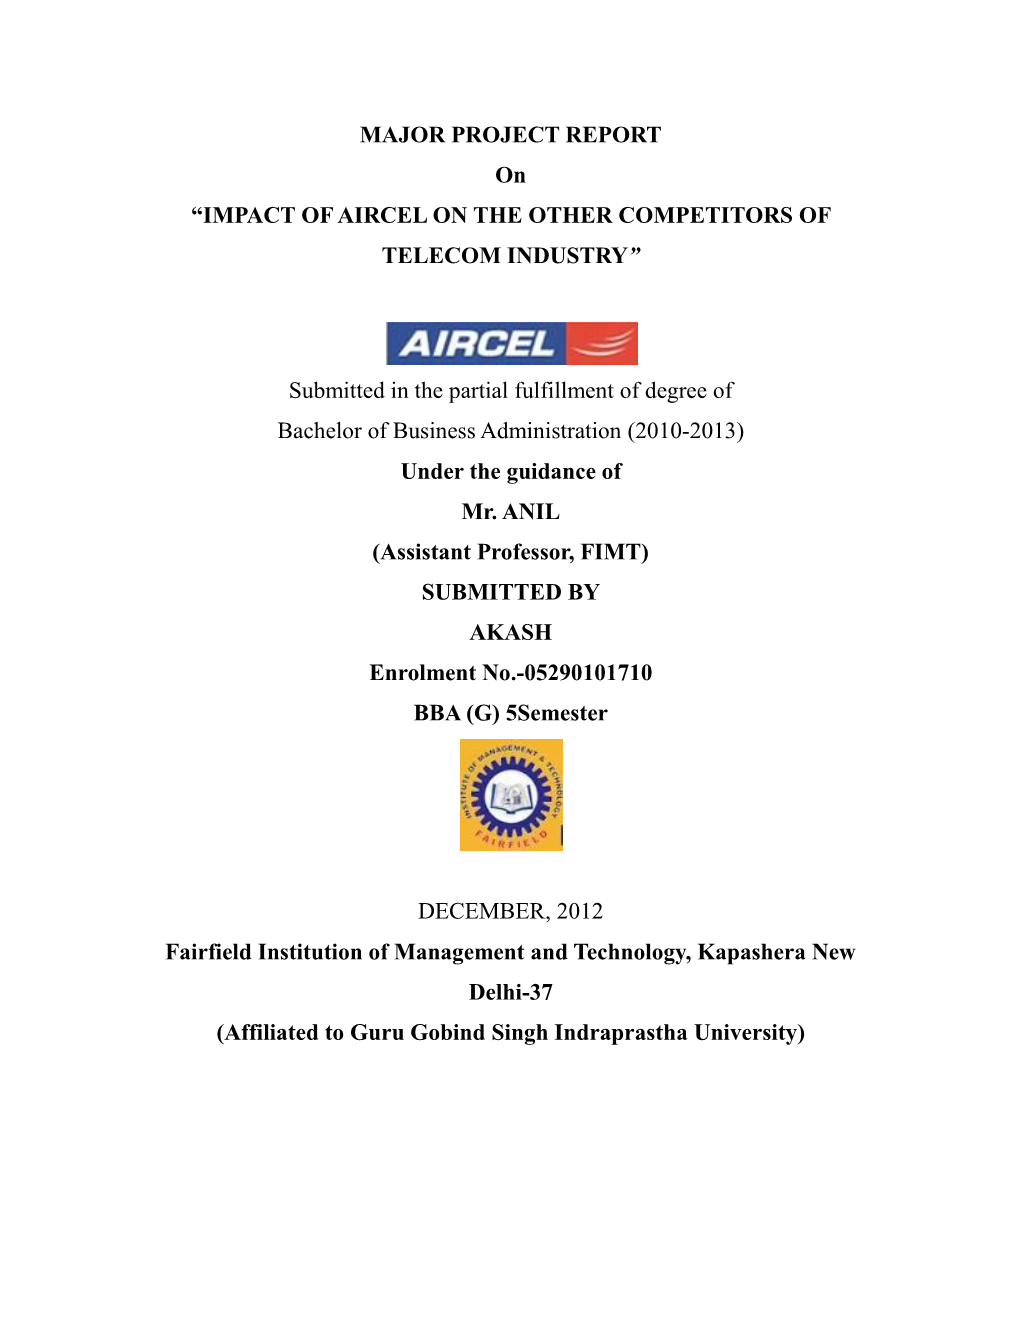 MAJOR PROJECT REPORT on “IMPACT of AIRCEL on the OTHER COMPETITORS of TELECOM INDUSTRY”